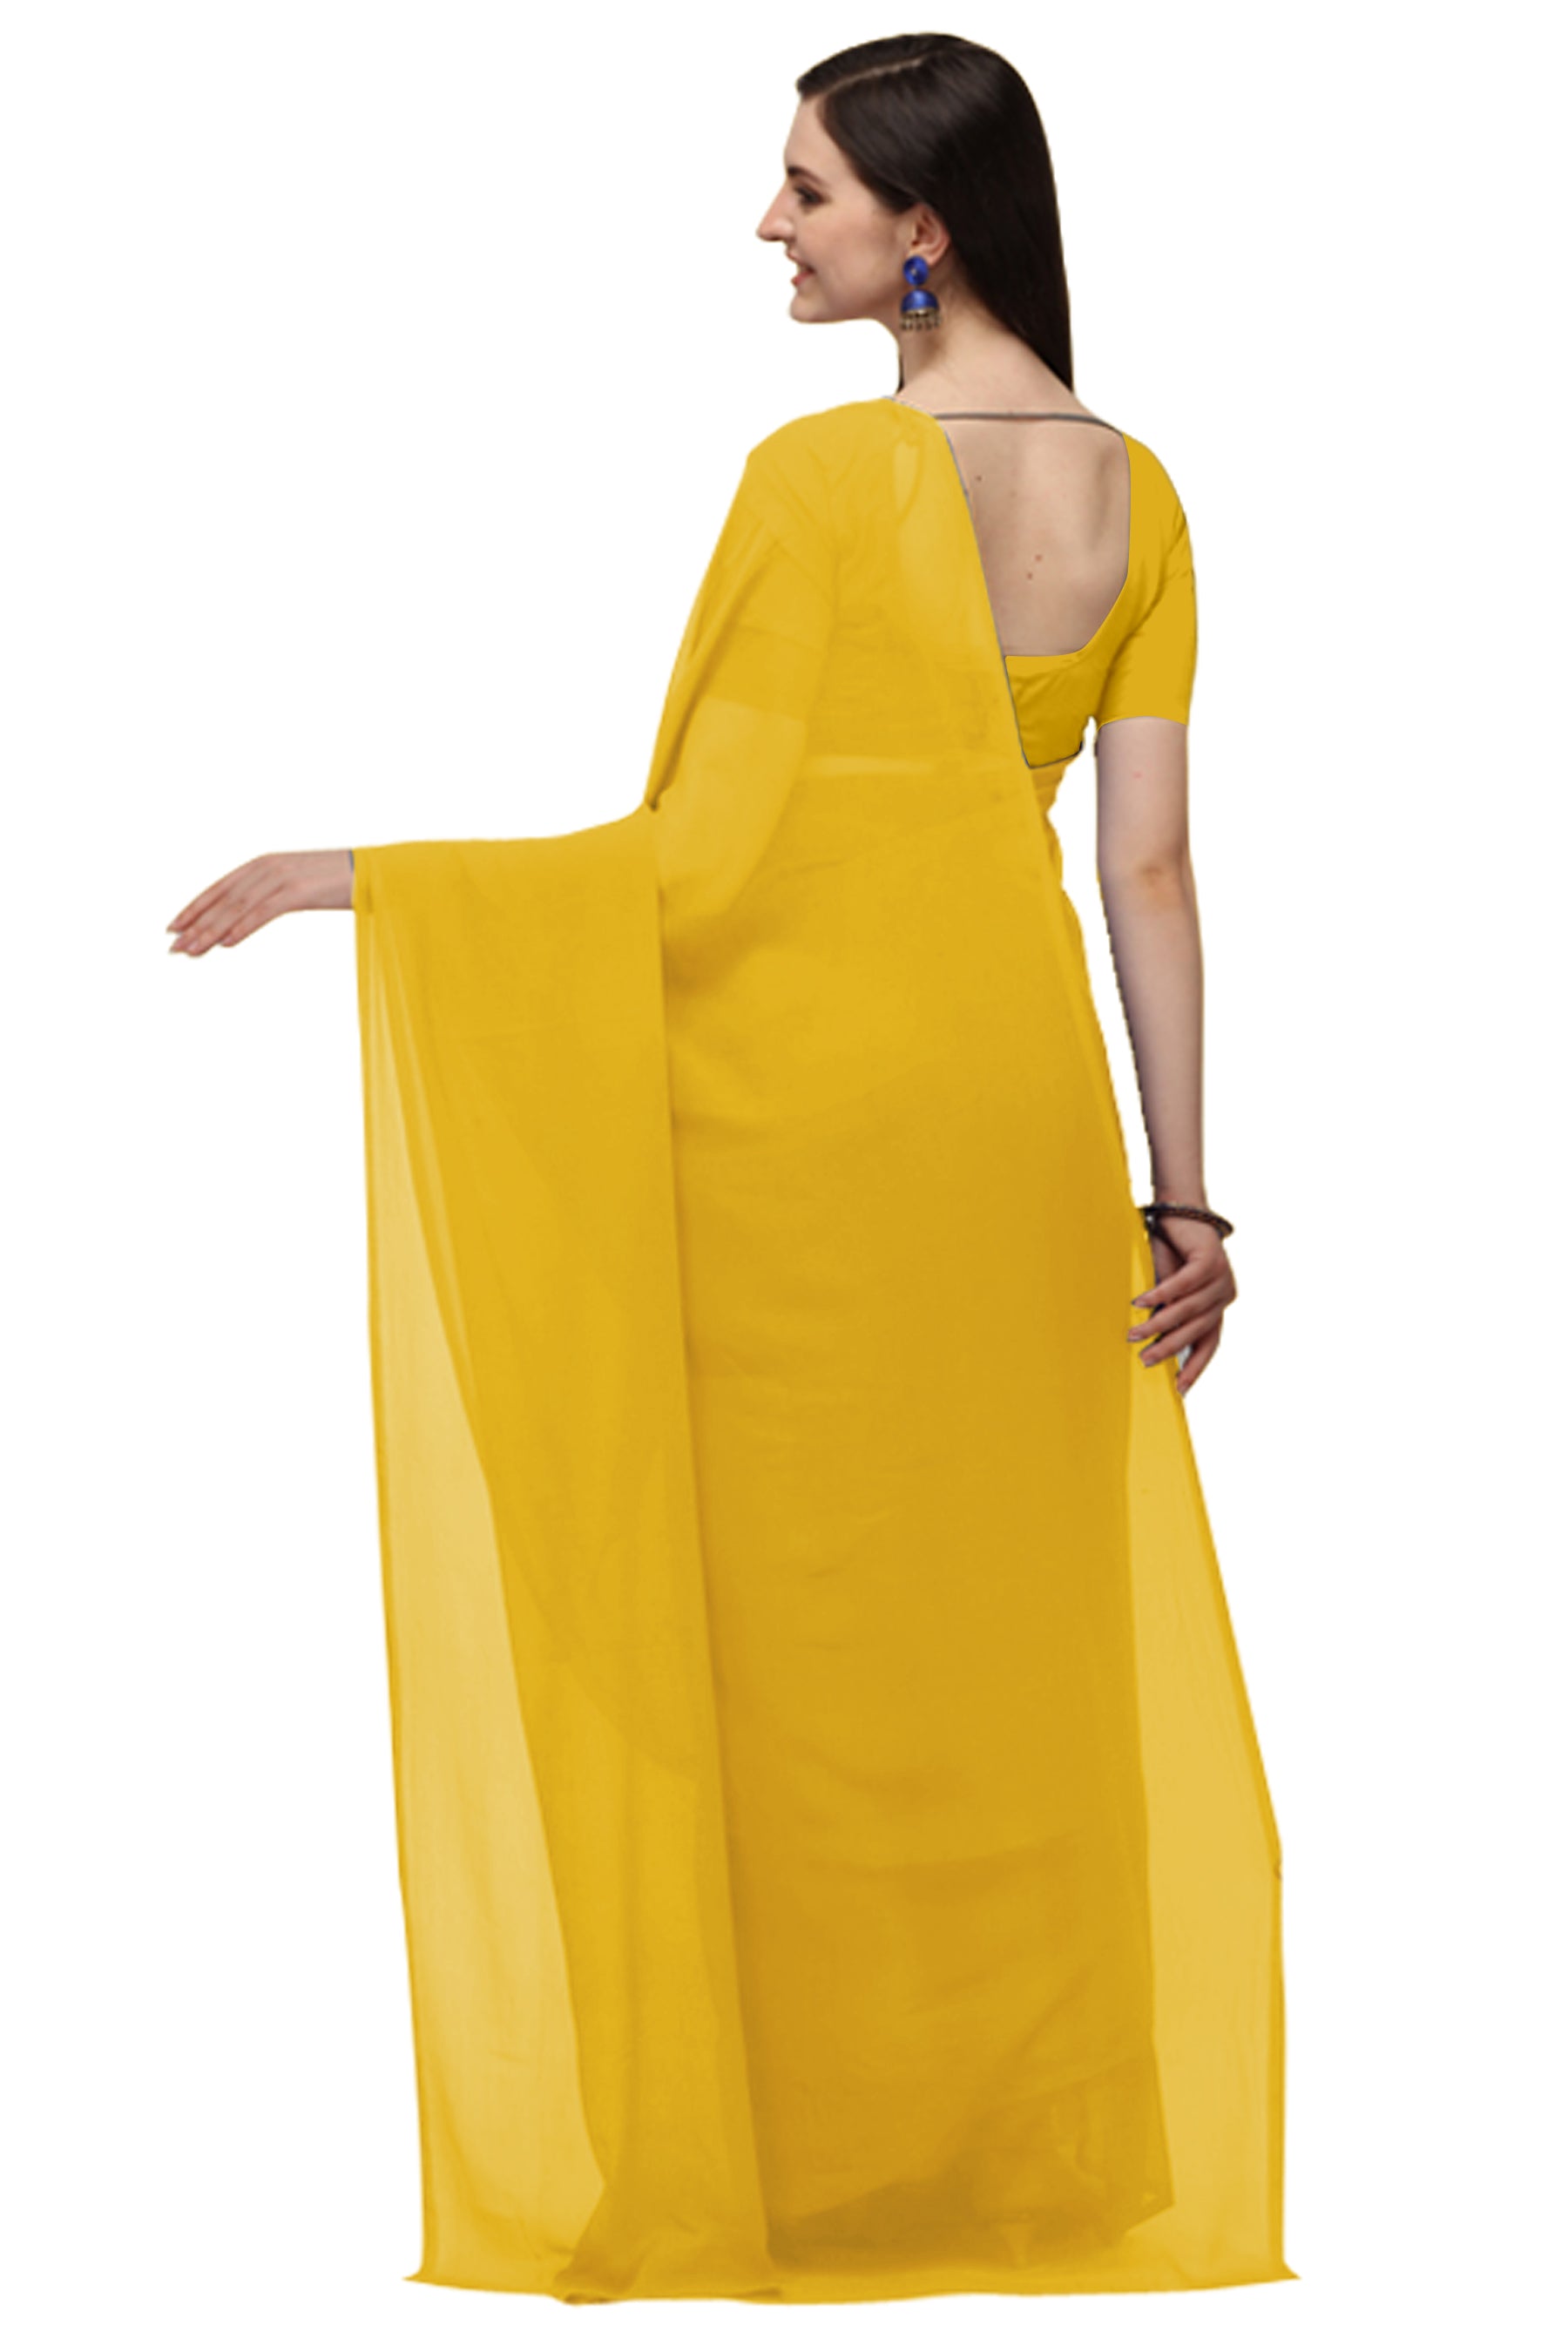 Women's Plain Woven Daily Wear  Formal Georgette Sari With Blouse Piece (Yellow) - NIMIDHYA